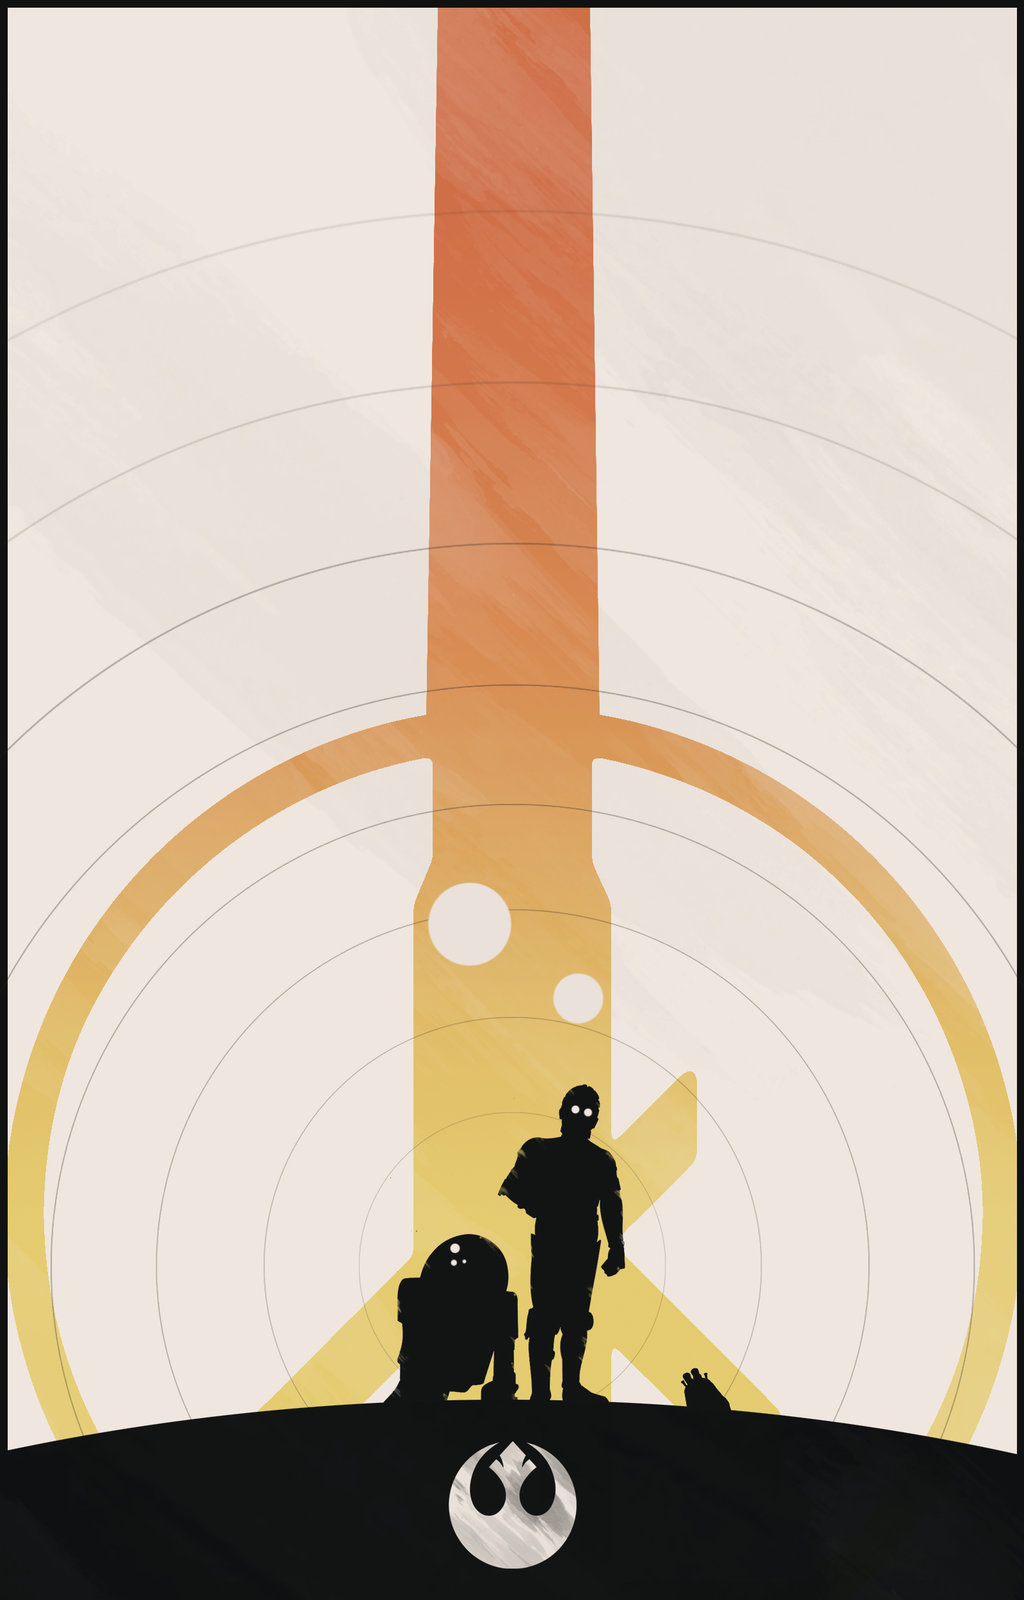 Star Wars Character Posters by Colin Morella